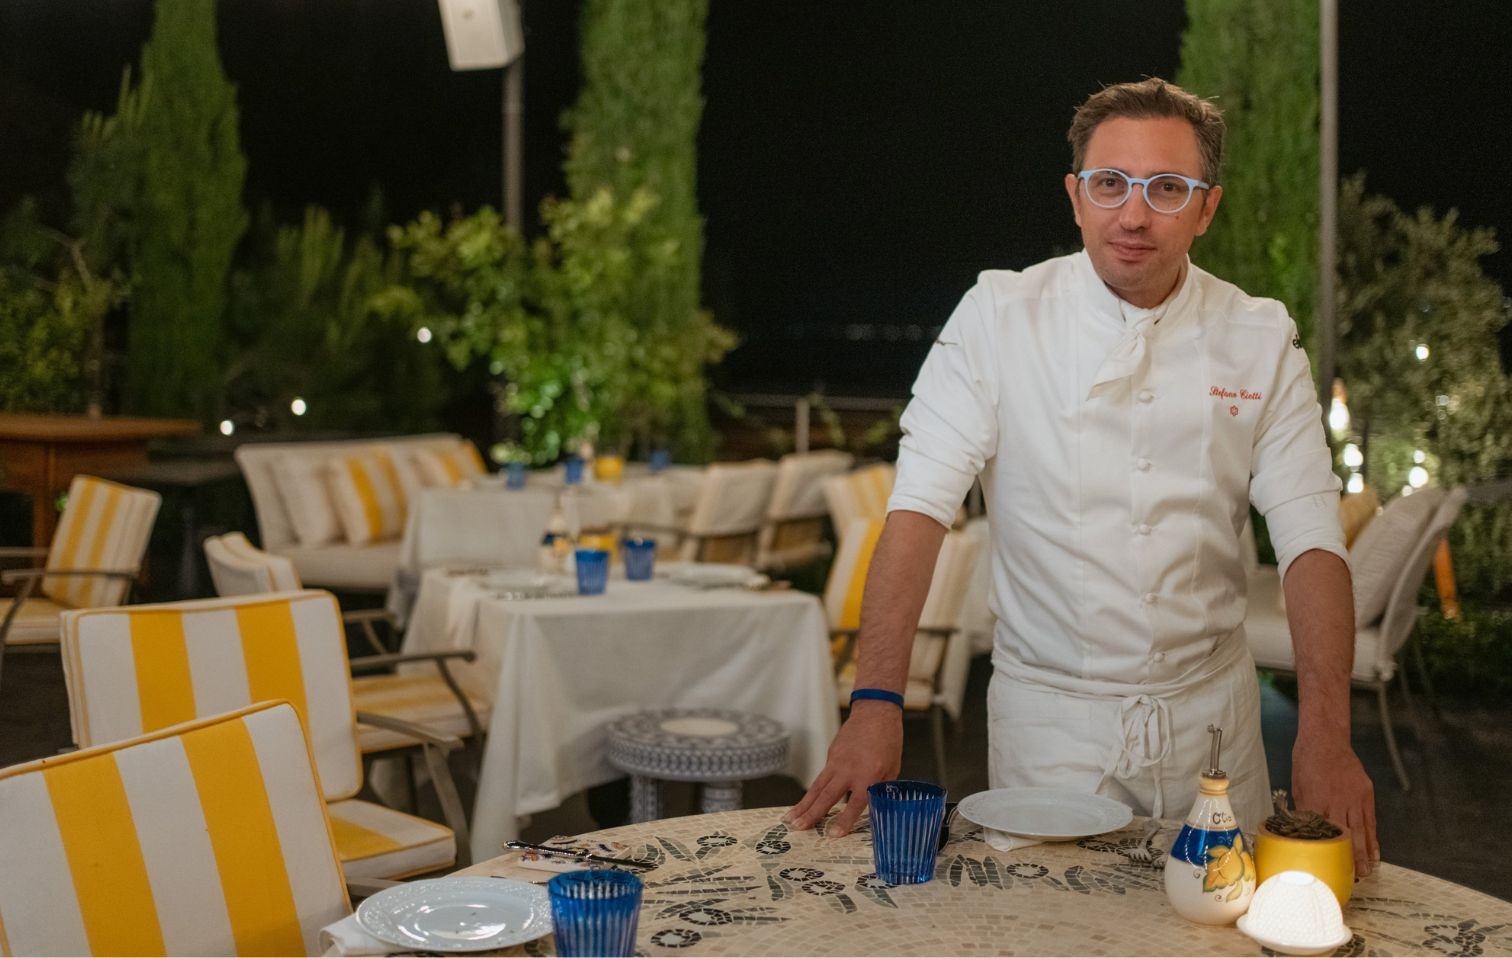 Chef-turned-icon in Turkey, from Marche region to top-hotel on the Aegean: ‘I’m bringing Italian cuisine abroad’